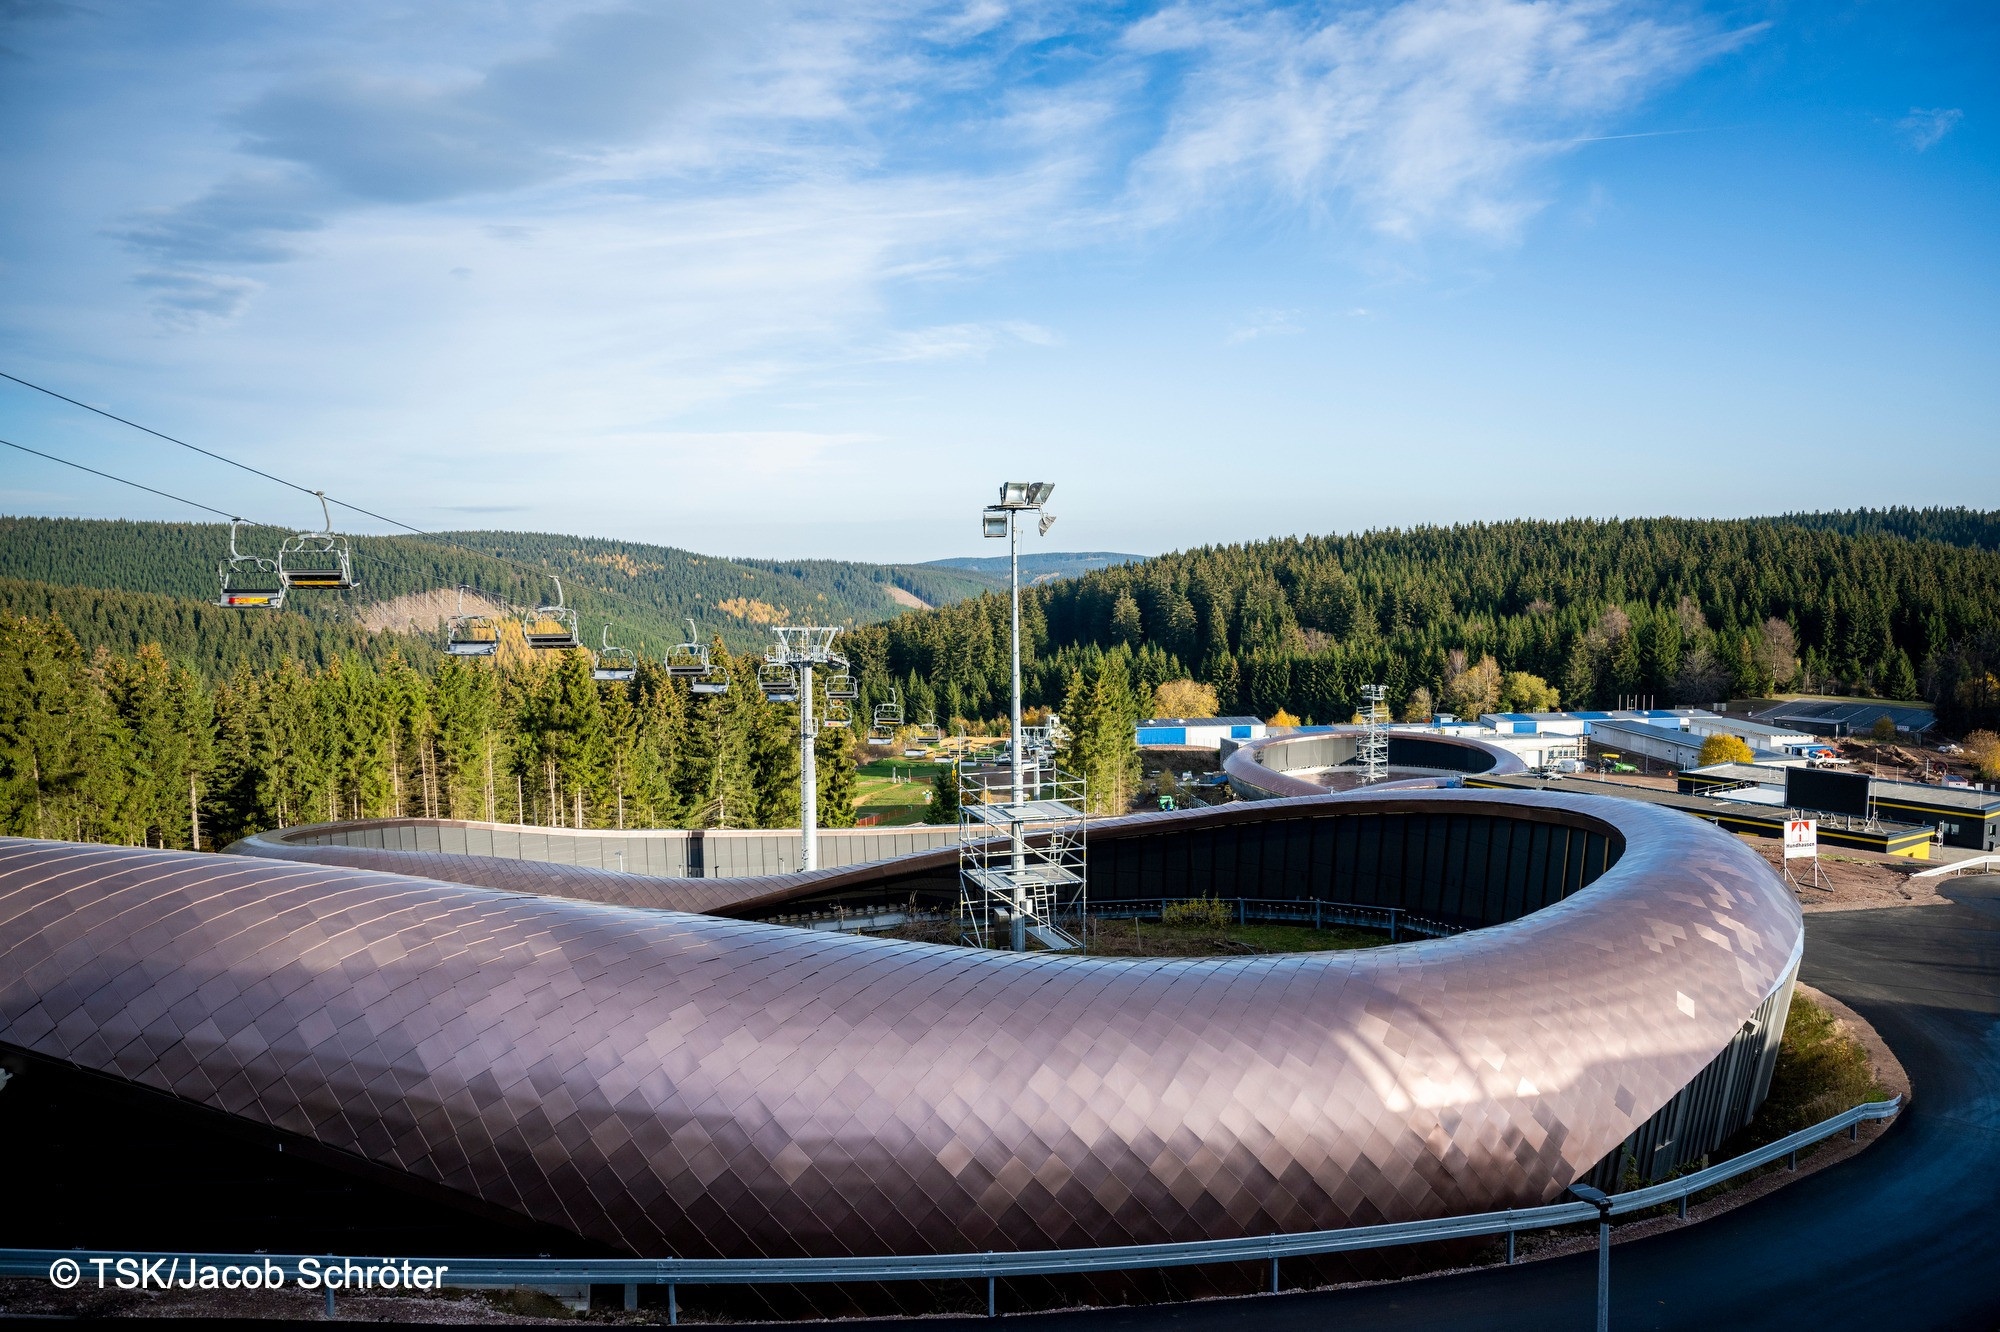 The ice run at Oberhof has been fully renovated to host next year's World Luge Championships ©Freistaat Thüringen/TSK/Jacob Schröter